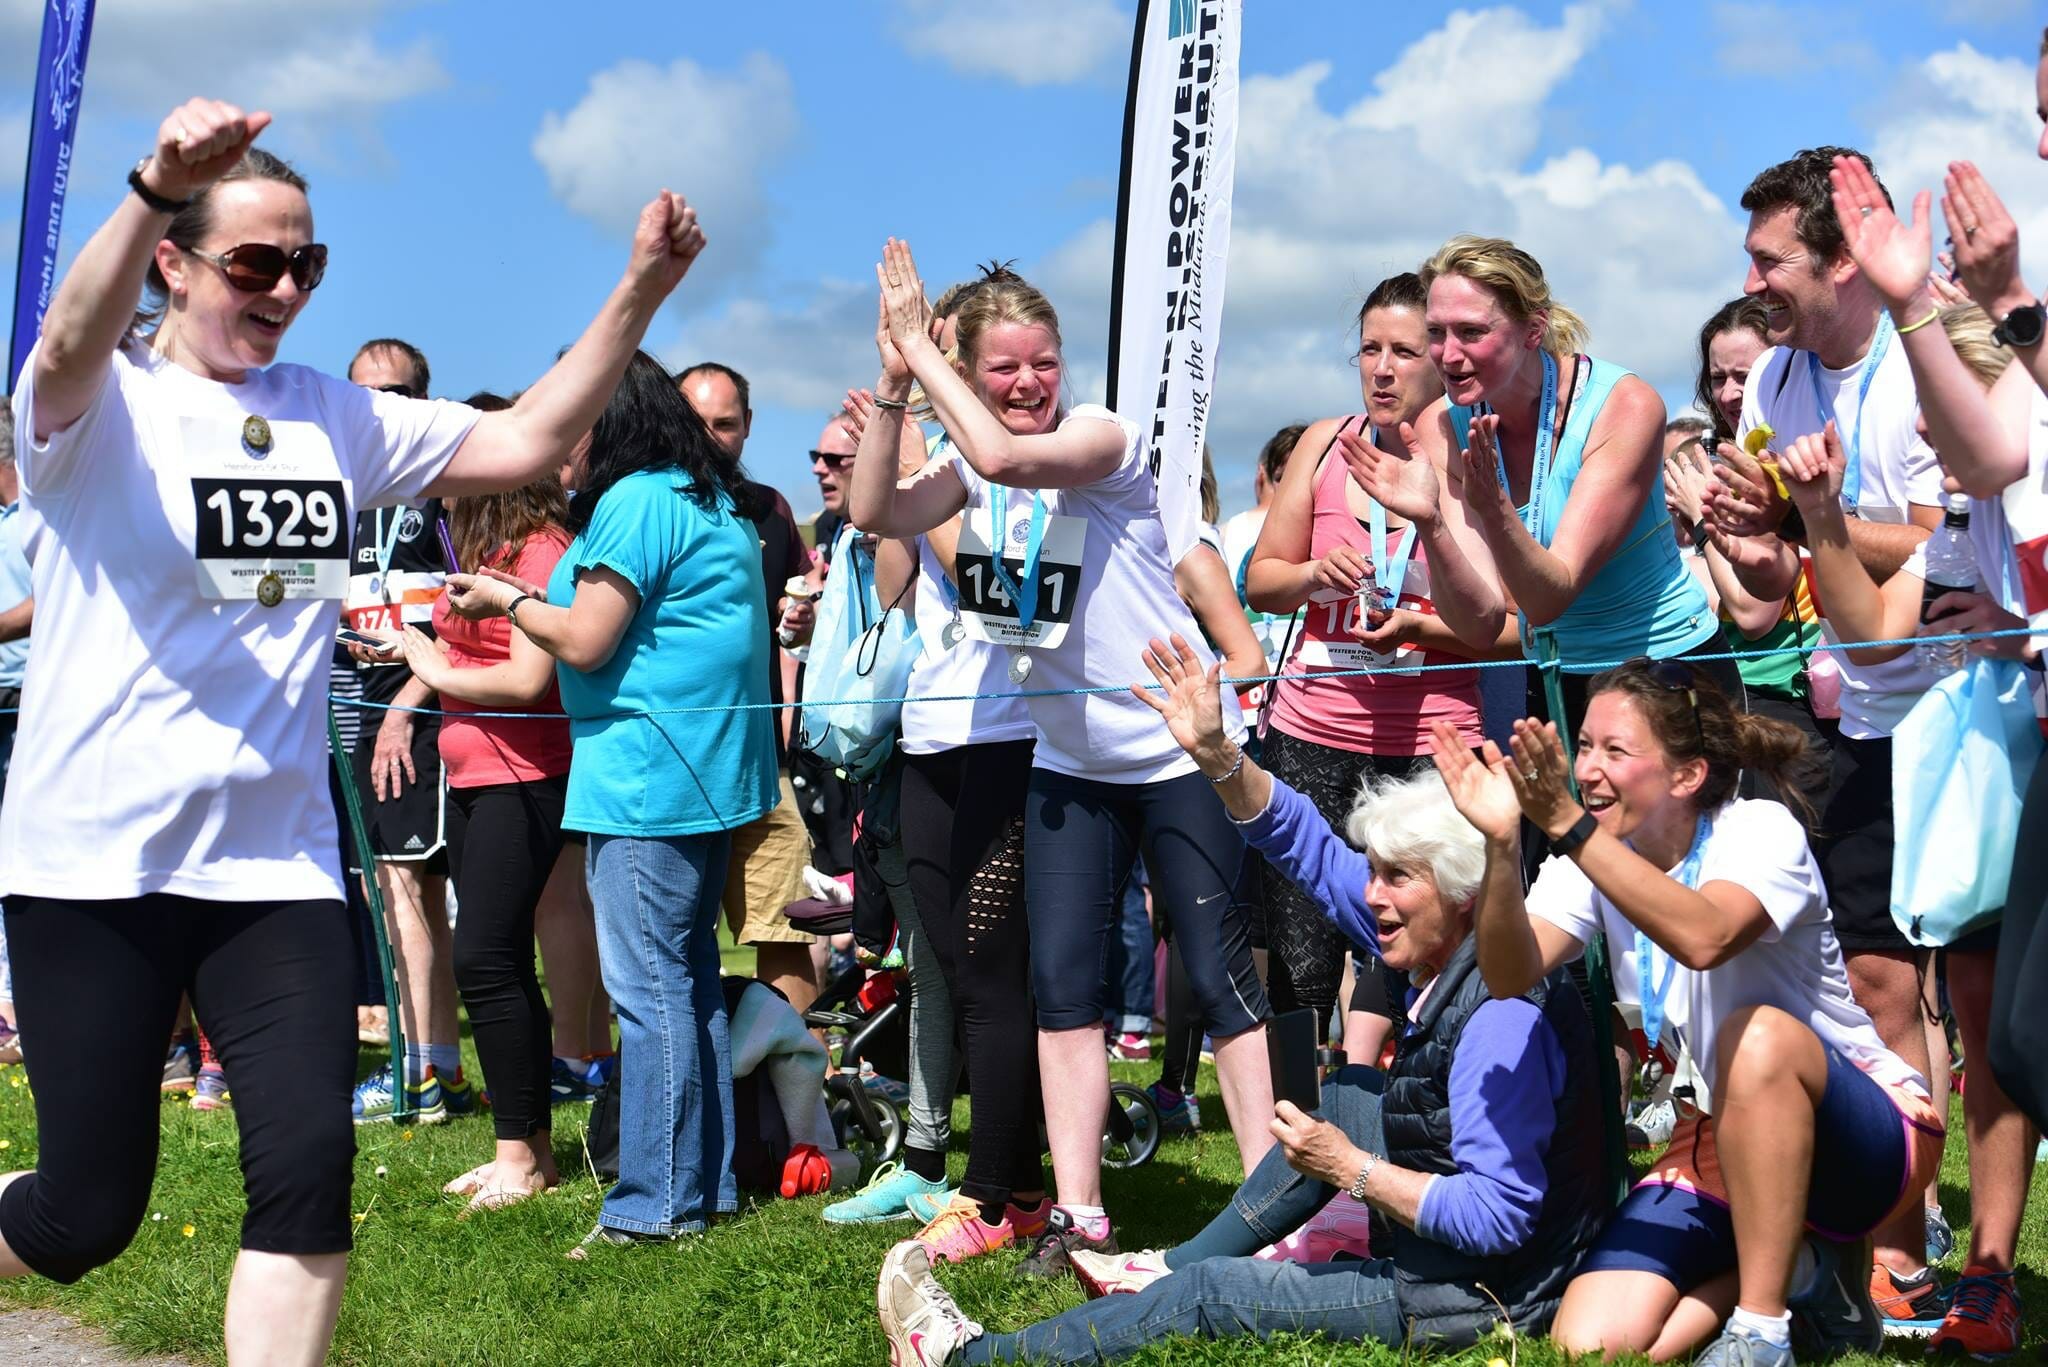 WHAT’S ON? | St Michael’s Hospice – Run Hereford this Sunday